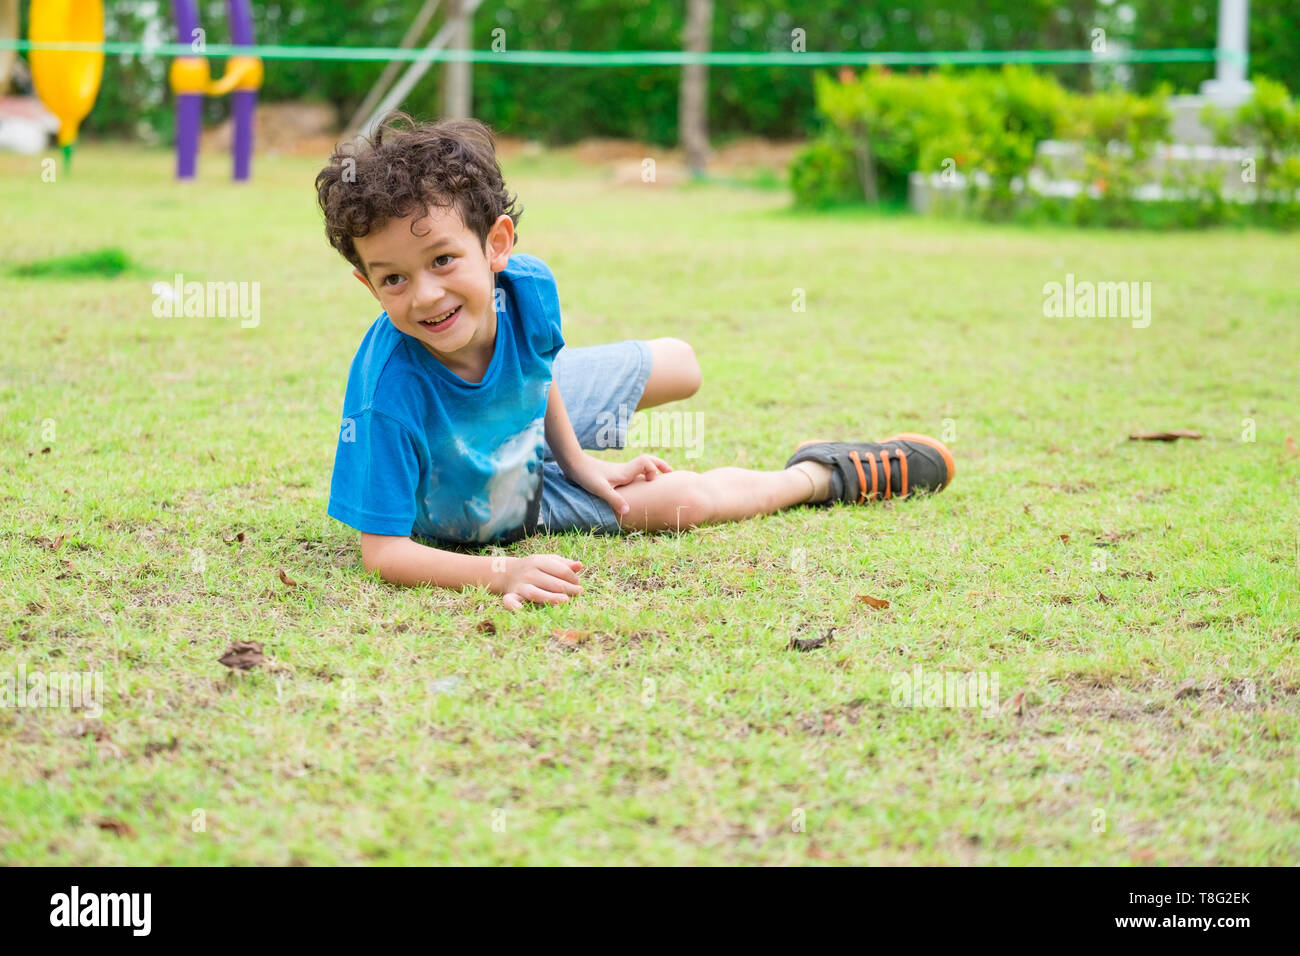 kid boy having fun to play children's playground area at school,kid running and fall down on grass.back to school outdoor activity. Stock Photo